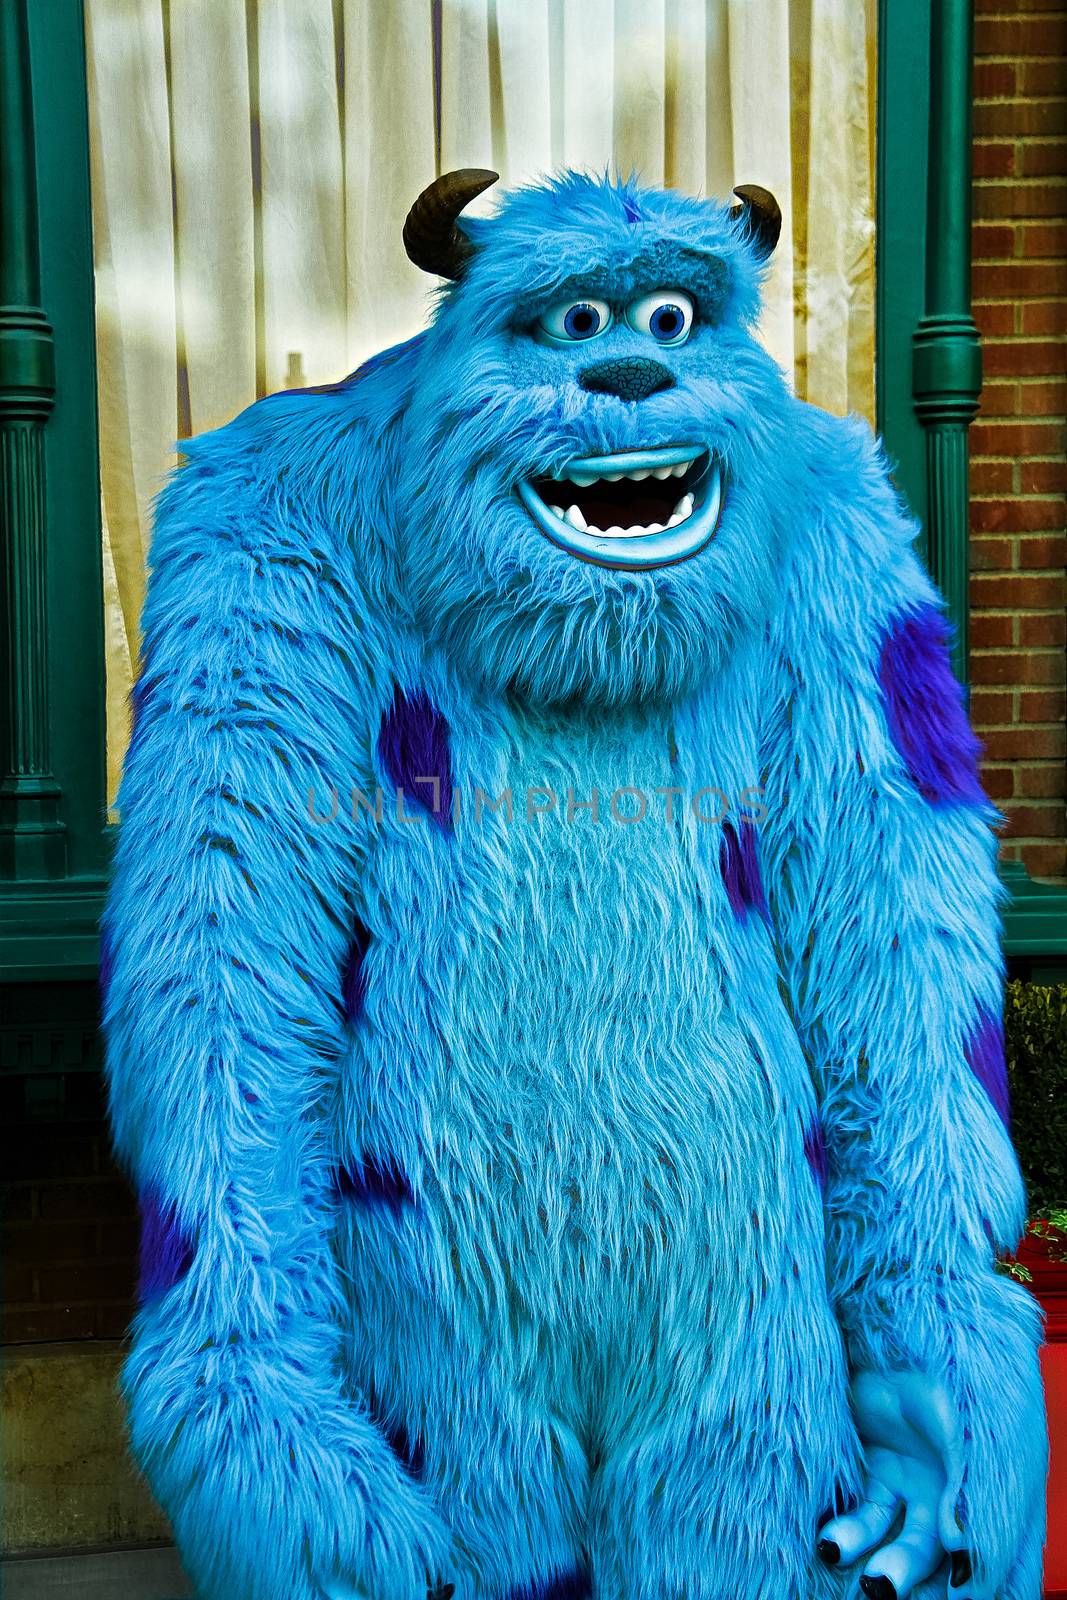 Anaheim,CA/USA - Nov 27, 2010 : A photo of James P. Sullivan, a monster character from Monster Inc at Disneyland in Anaheim.Disney Pixar animation.